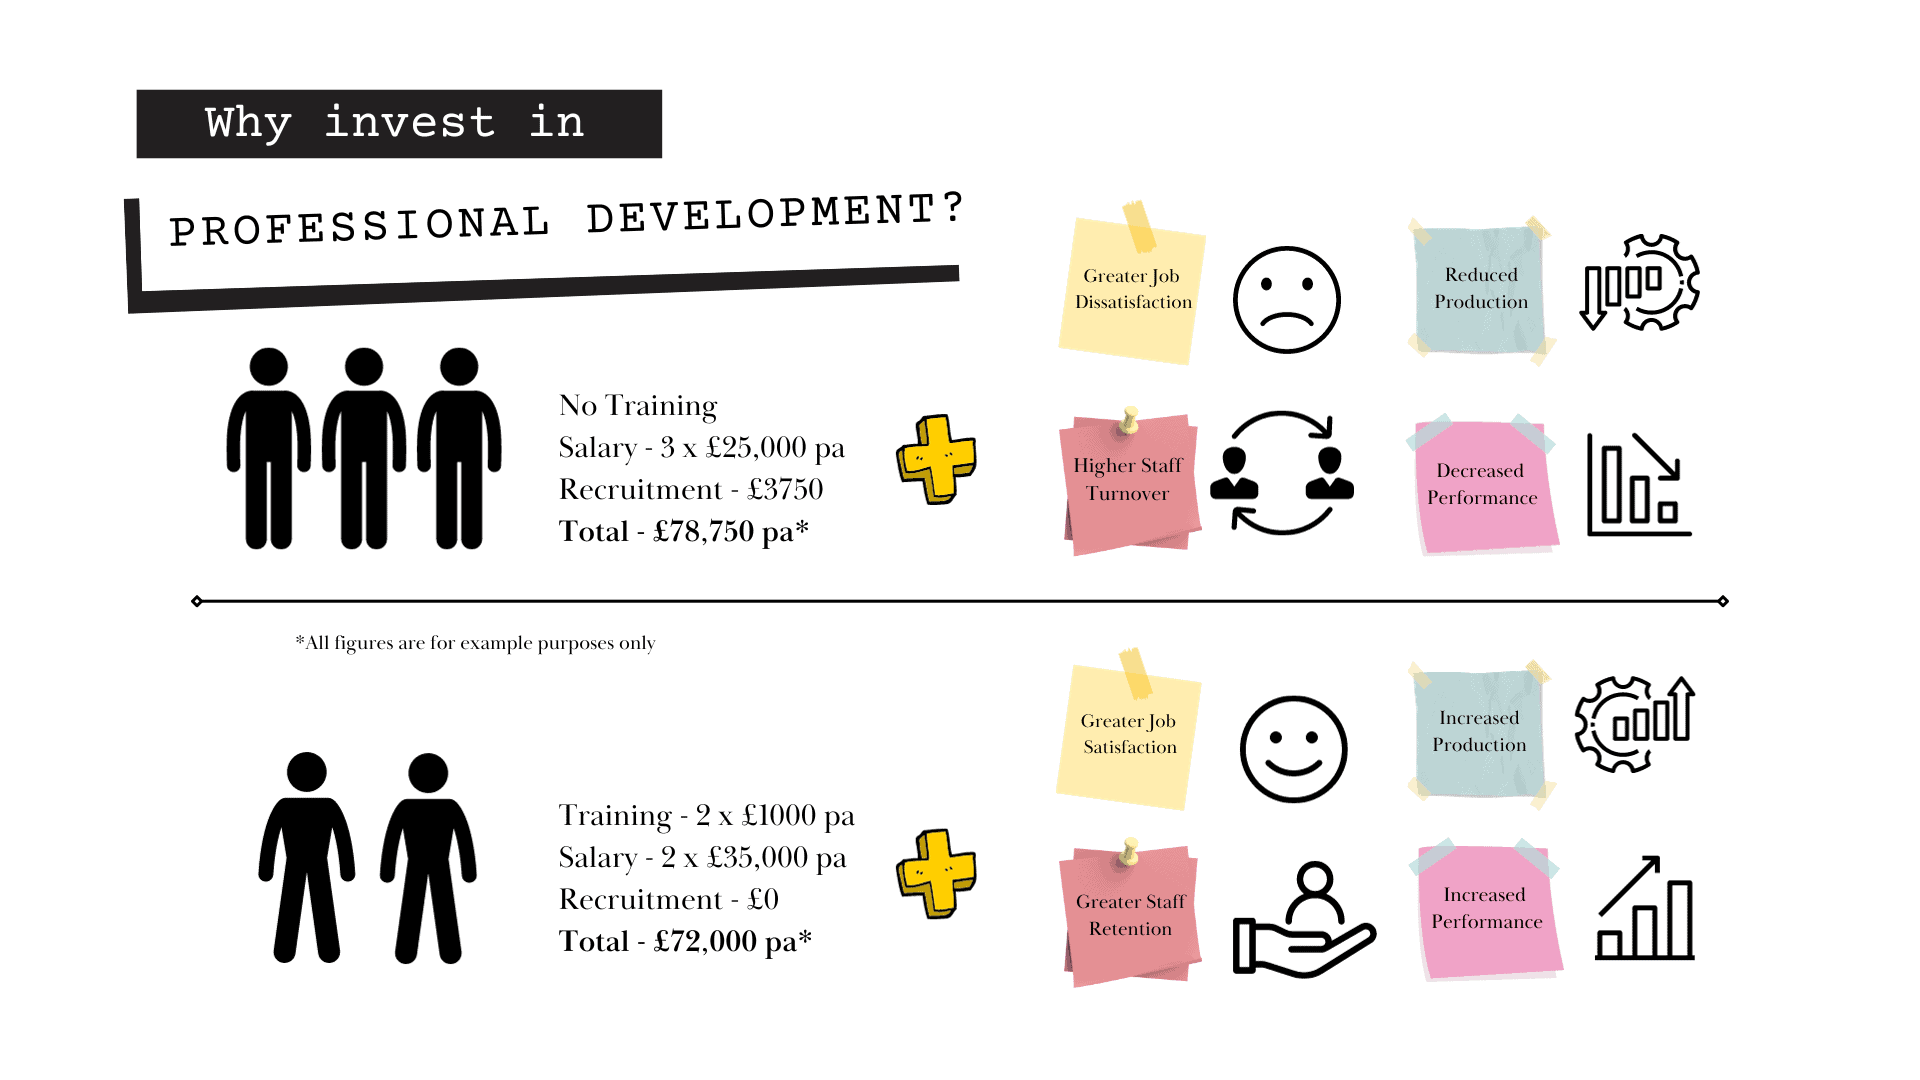 Infographic depicting the benefits of investing in professional development to reduce stress and improve productivity while spending less per year